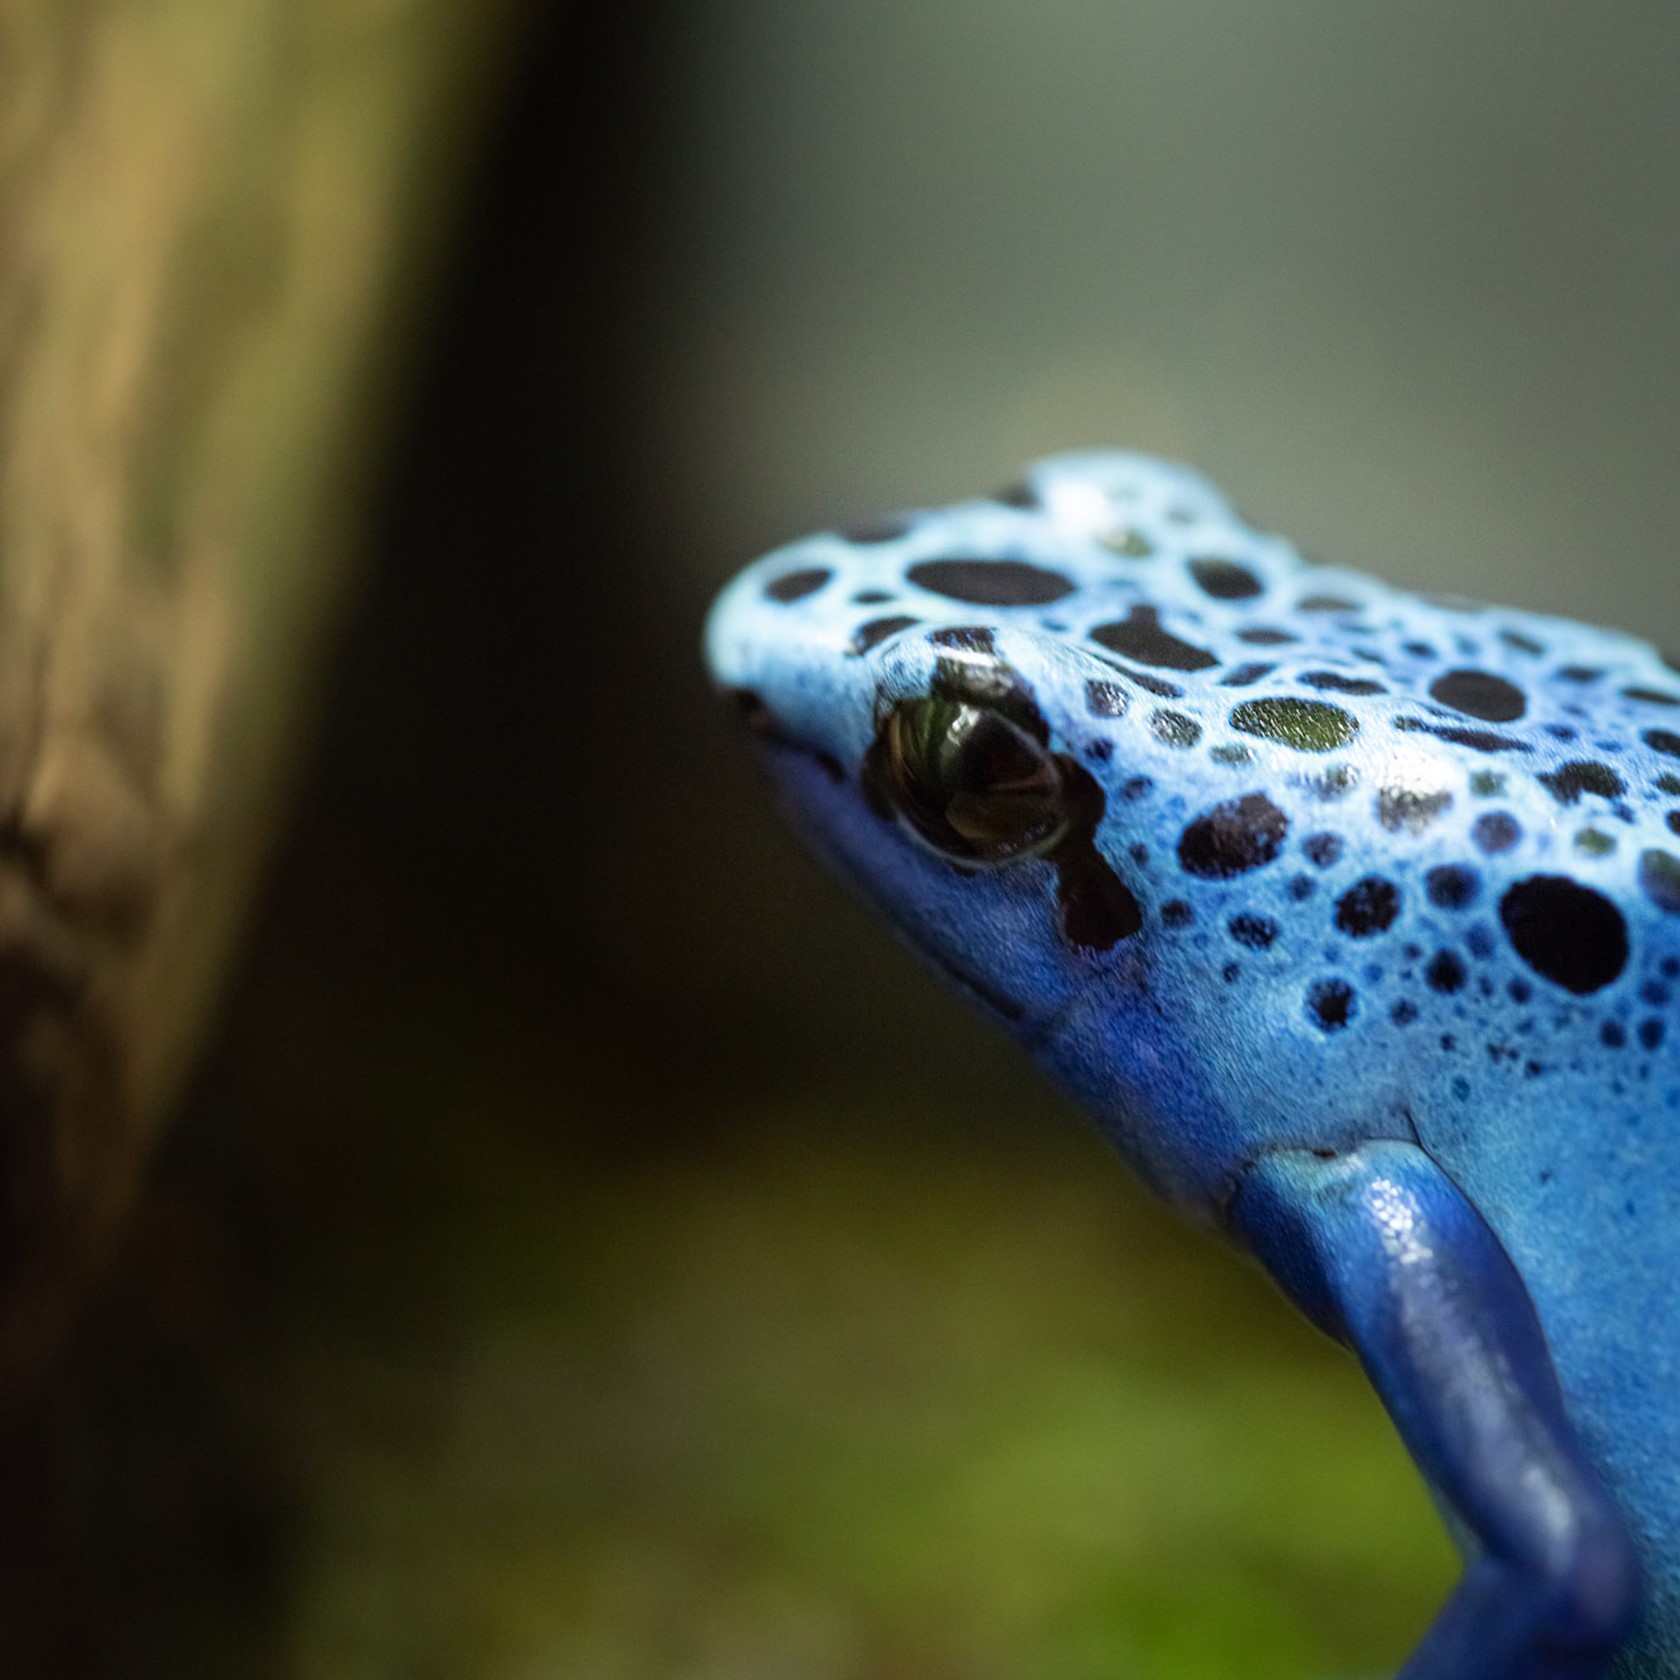 Blue Poison Dart Frog at Jersey Zoo